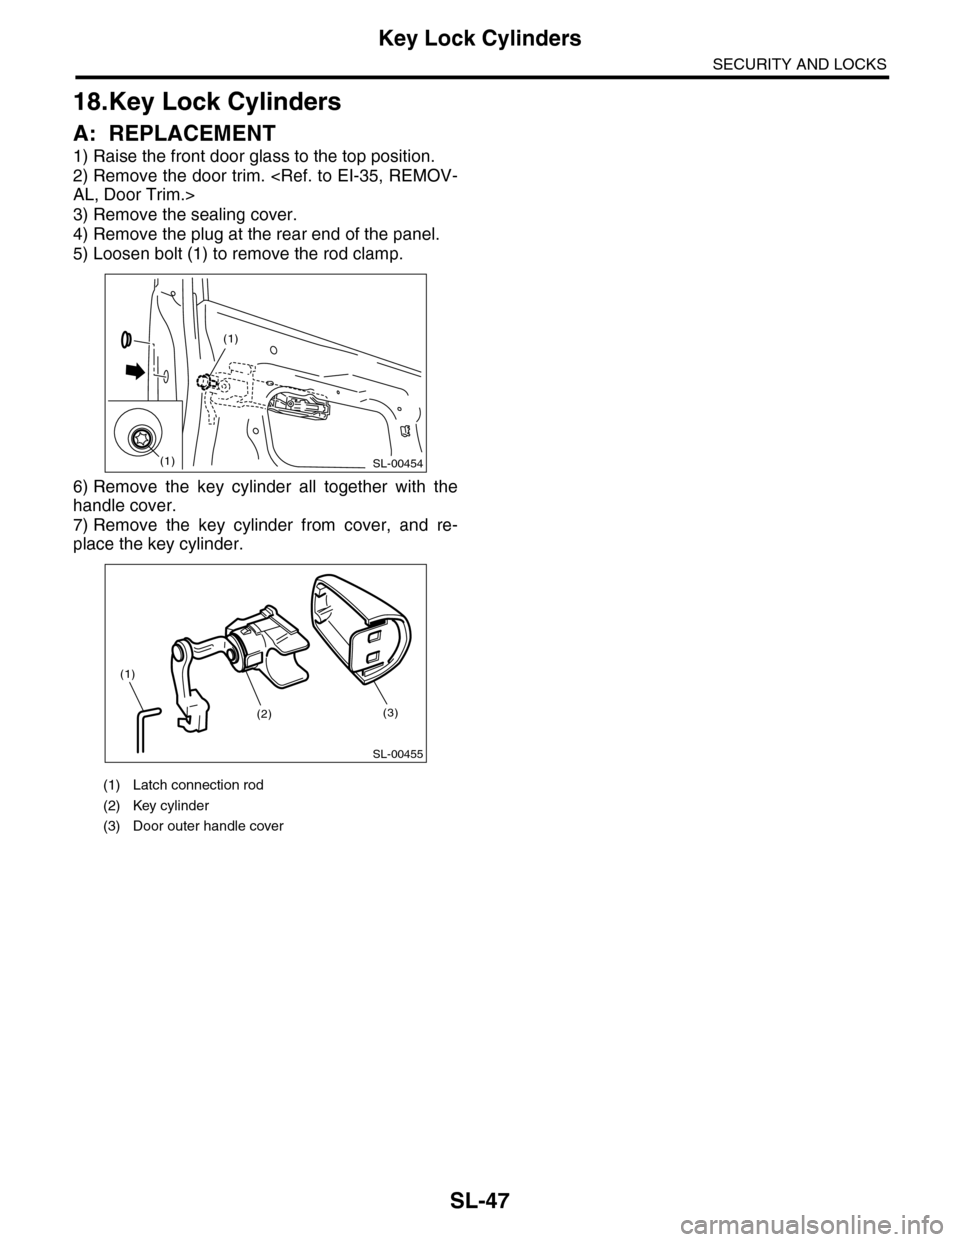 SUBARU TRIBECA 2009 1.G Service Workshop Manual SL-47
Key Lock Cylinders
SECURITY AND LOCKS
18.Key Lock Cylinders
A: REPLACEMENT
1) Raise the front door glass to the top position.
2) Remove the door trim. <Ref. to EI-35, REMOV-
AL, Door Trim.>
3) R